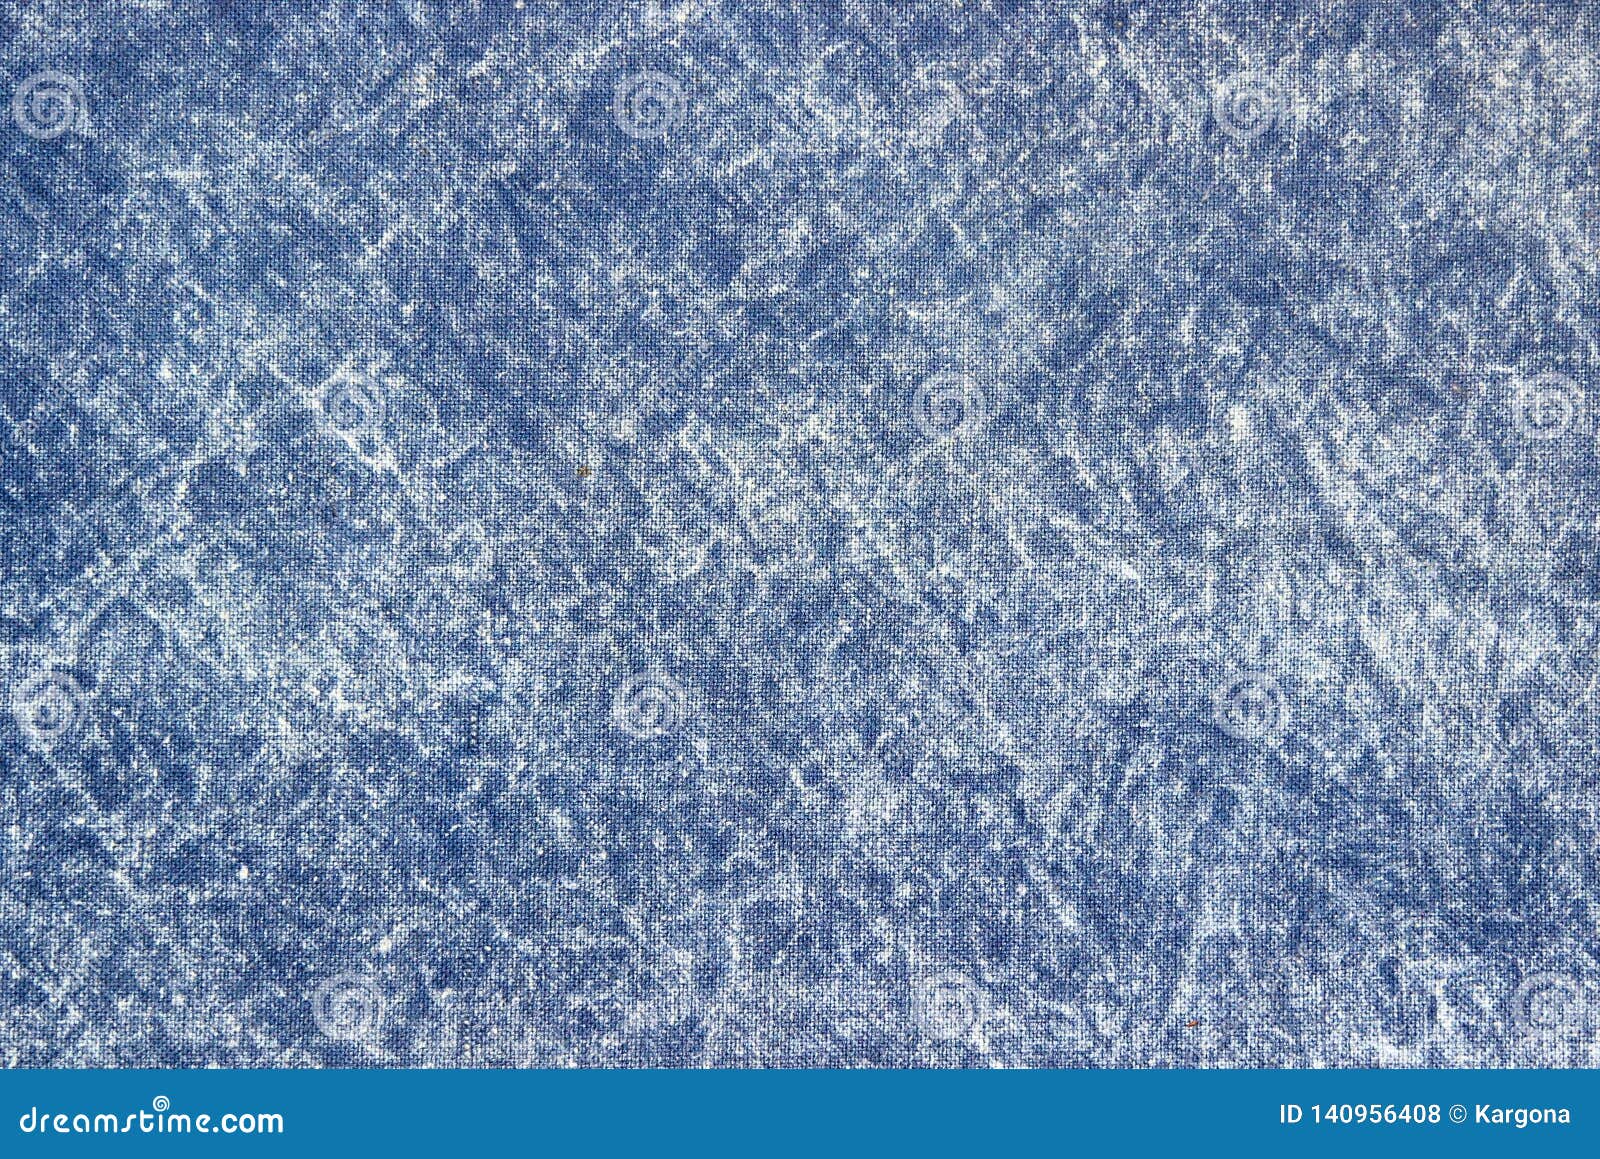 texture of a blue stone-washed denim fabric